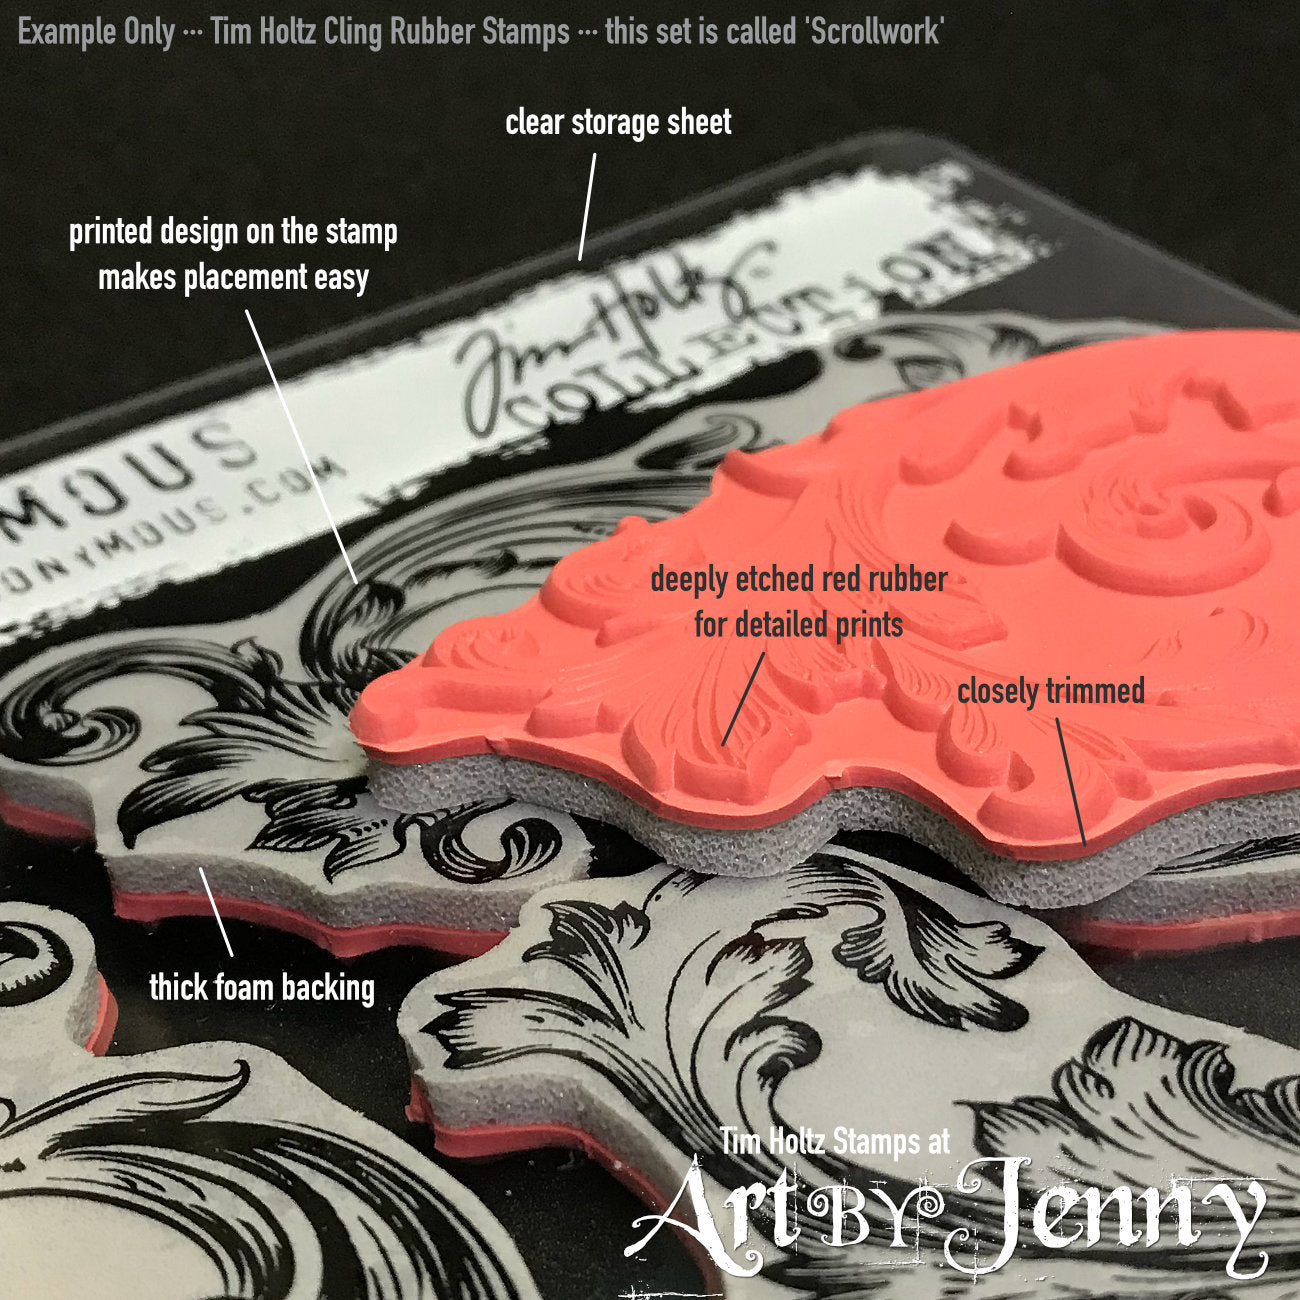 photograph closeup of Tim Holtz Stampers Anonymous cling rubber stamps, example of quality with notes